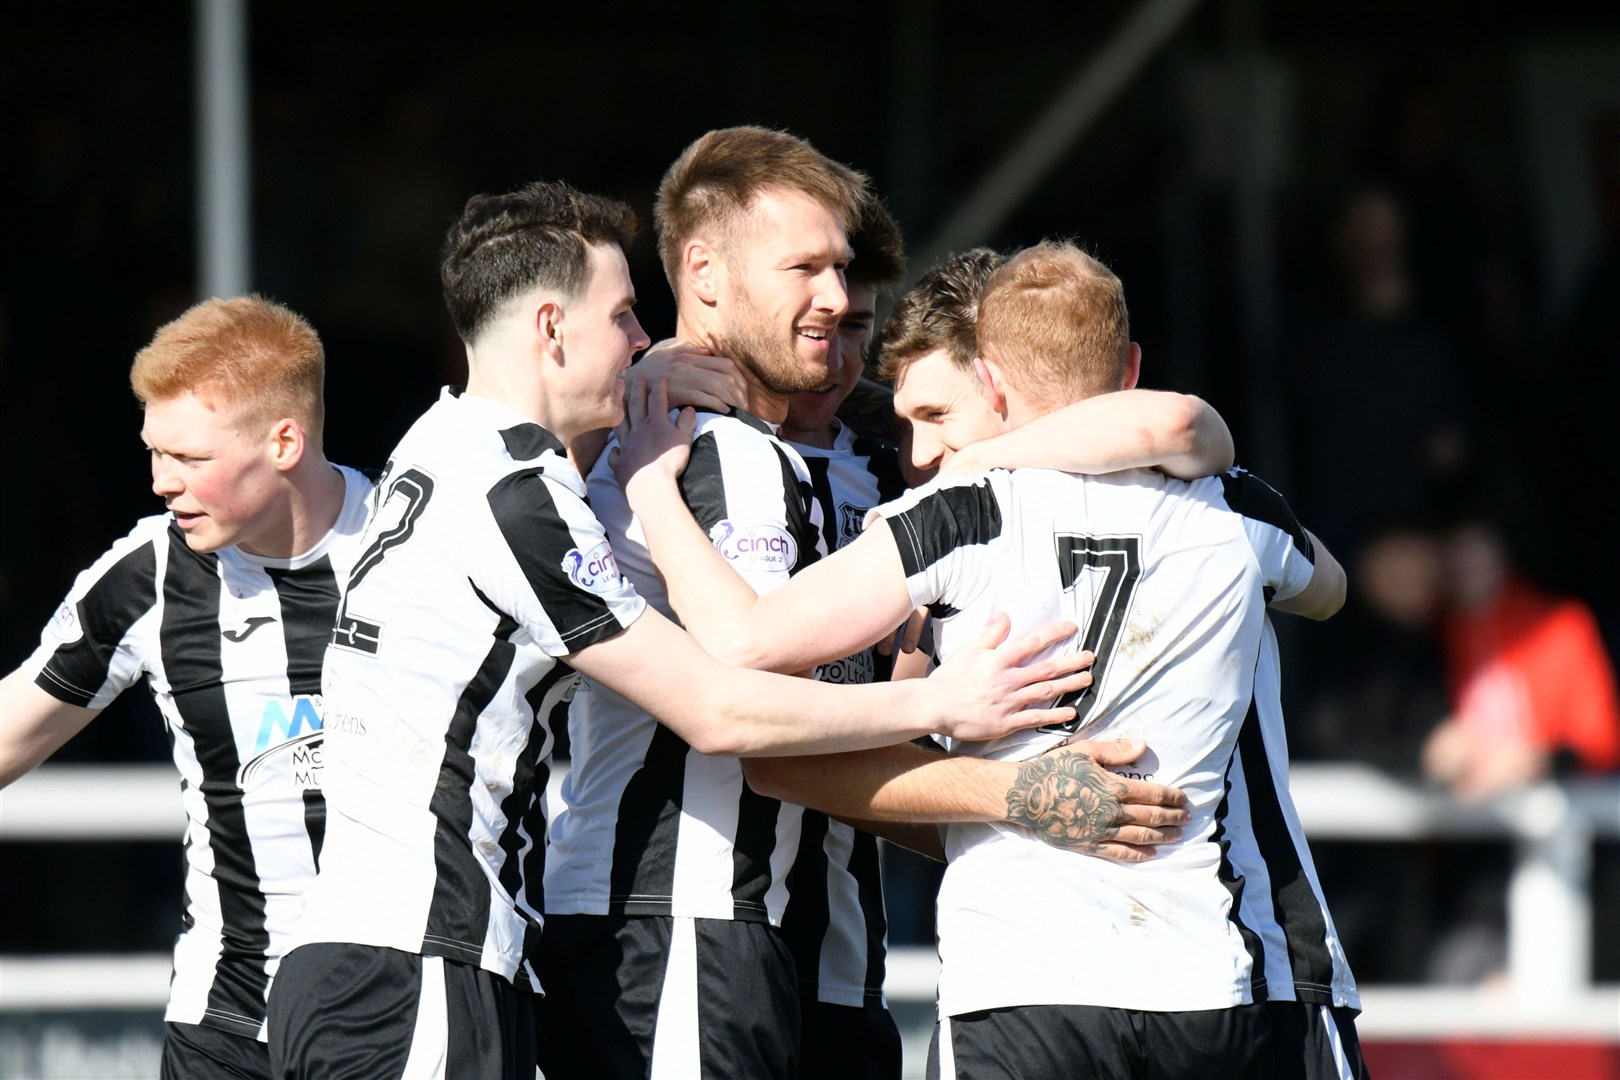 Brian Cameron celebrates his opening goal with team mates. Picture: Daniel Forsyth